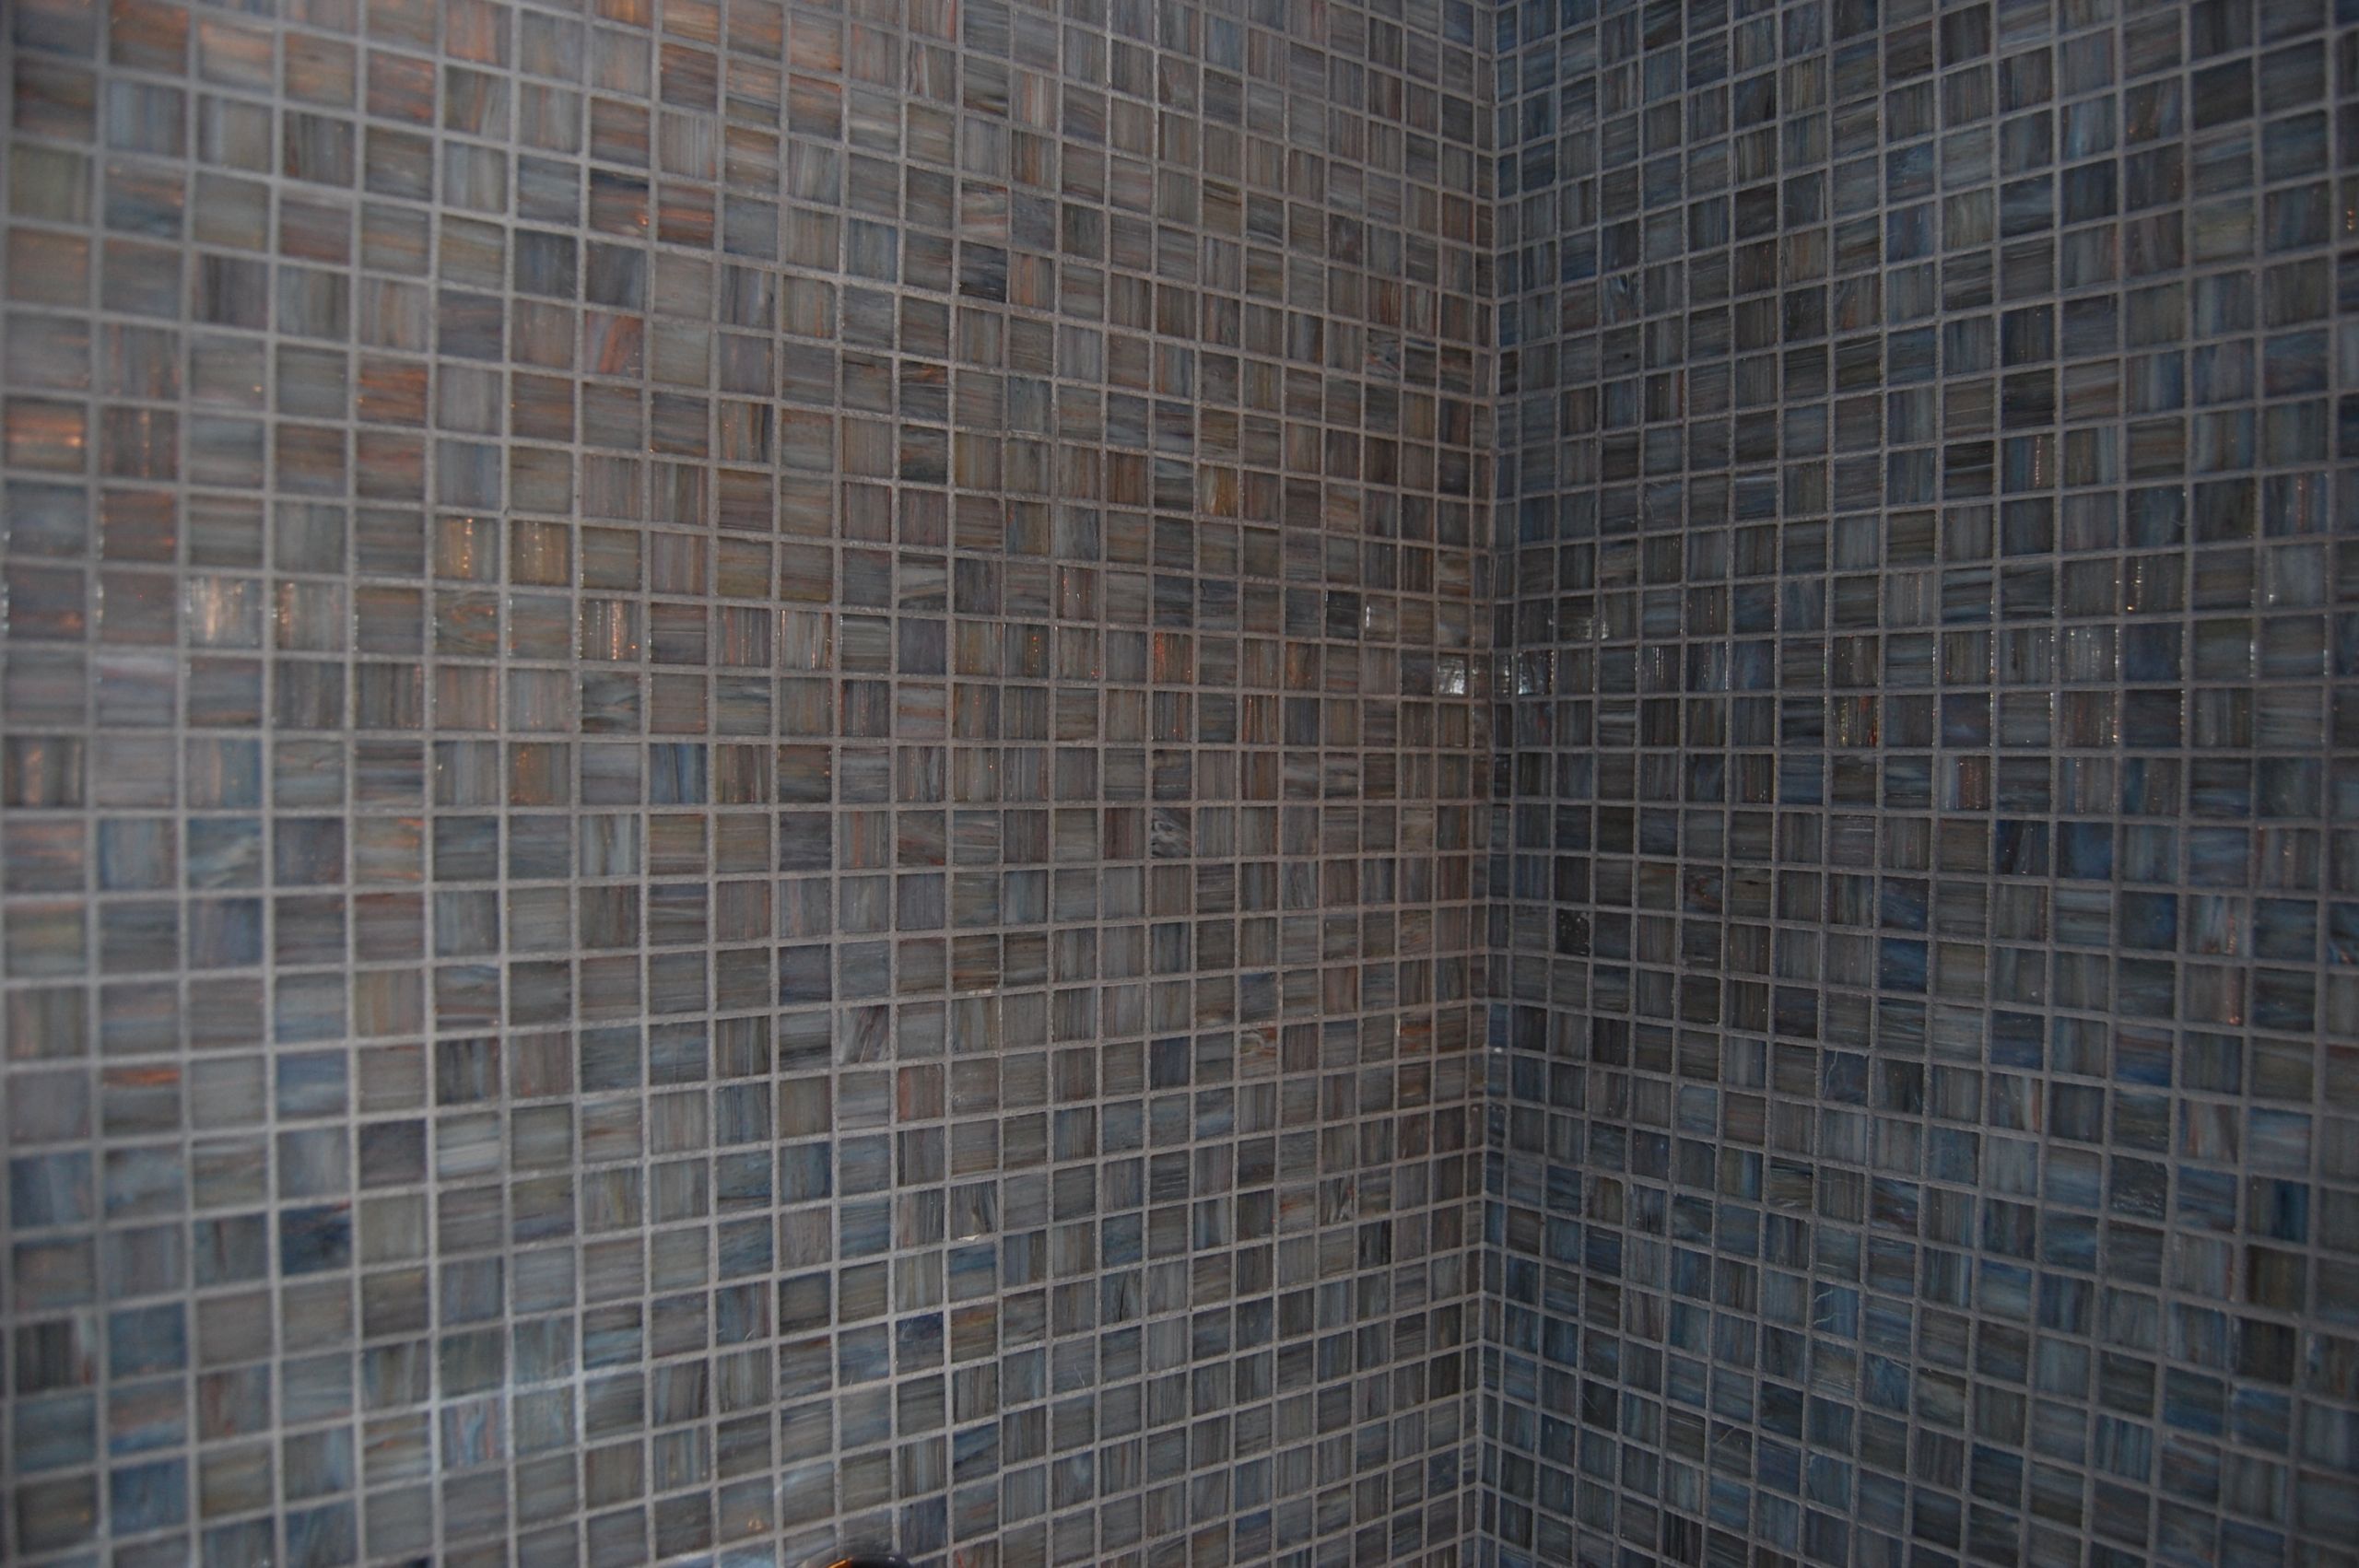 Vinyl Bathroom Wall Tiles
 32 amazing ideas and pictures of the best vinyl tiles for